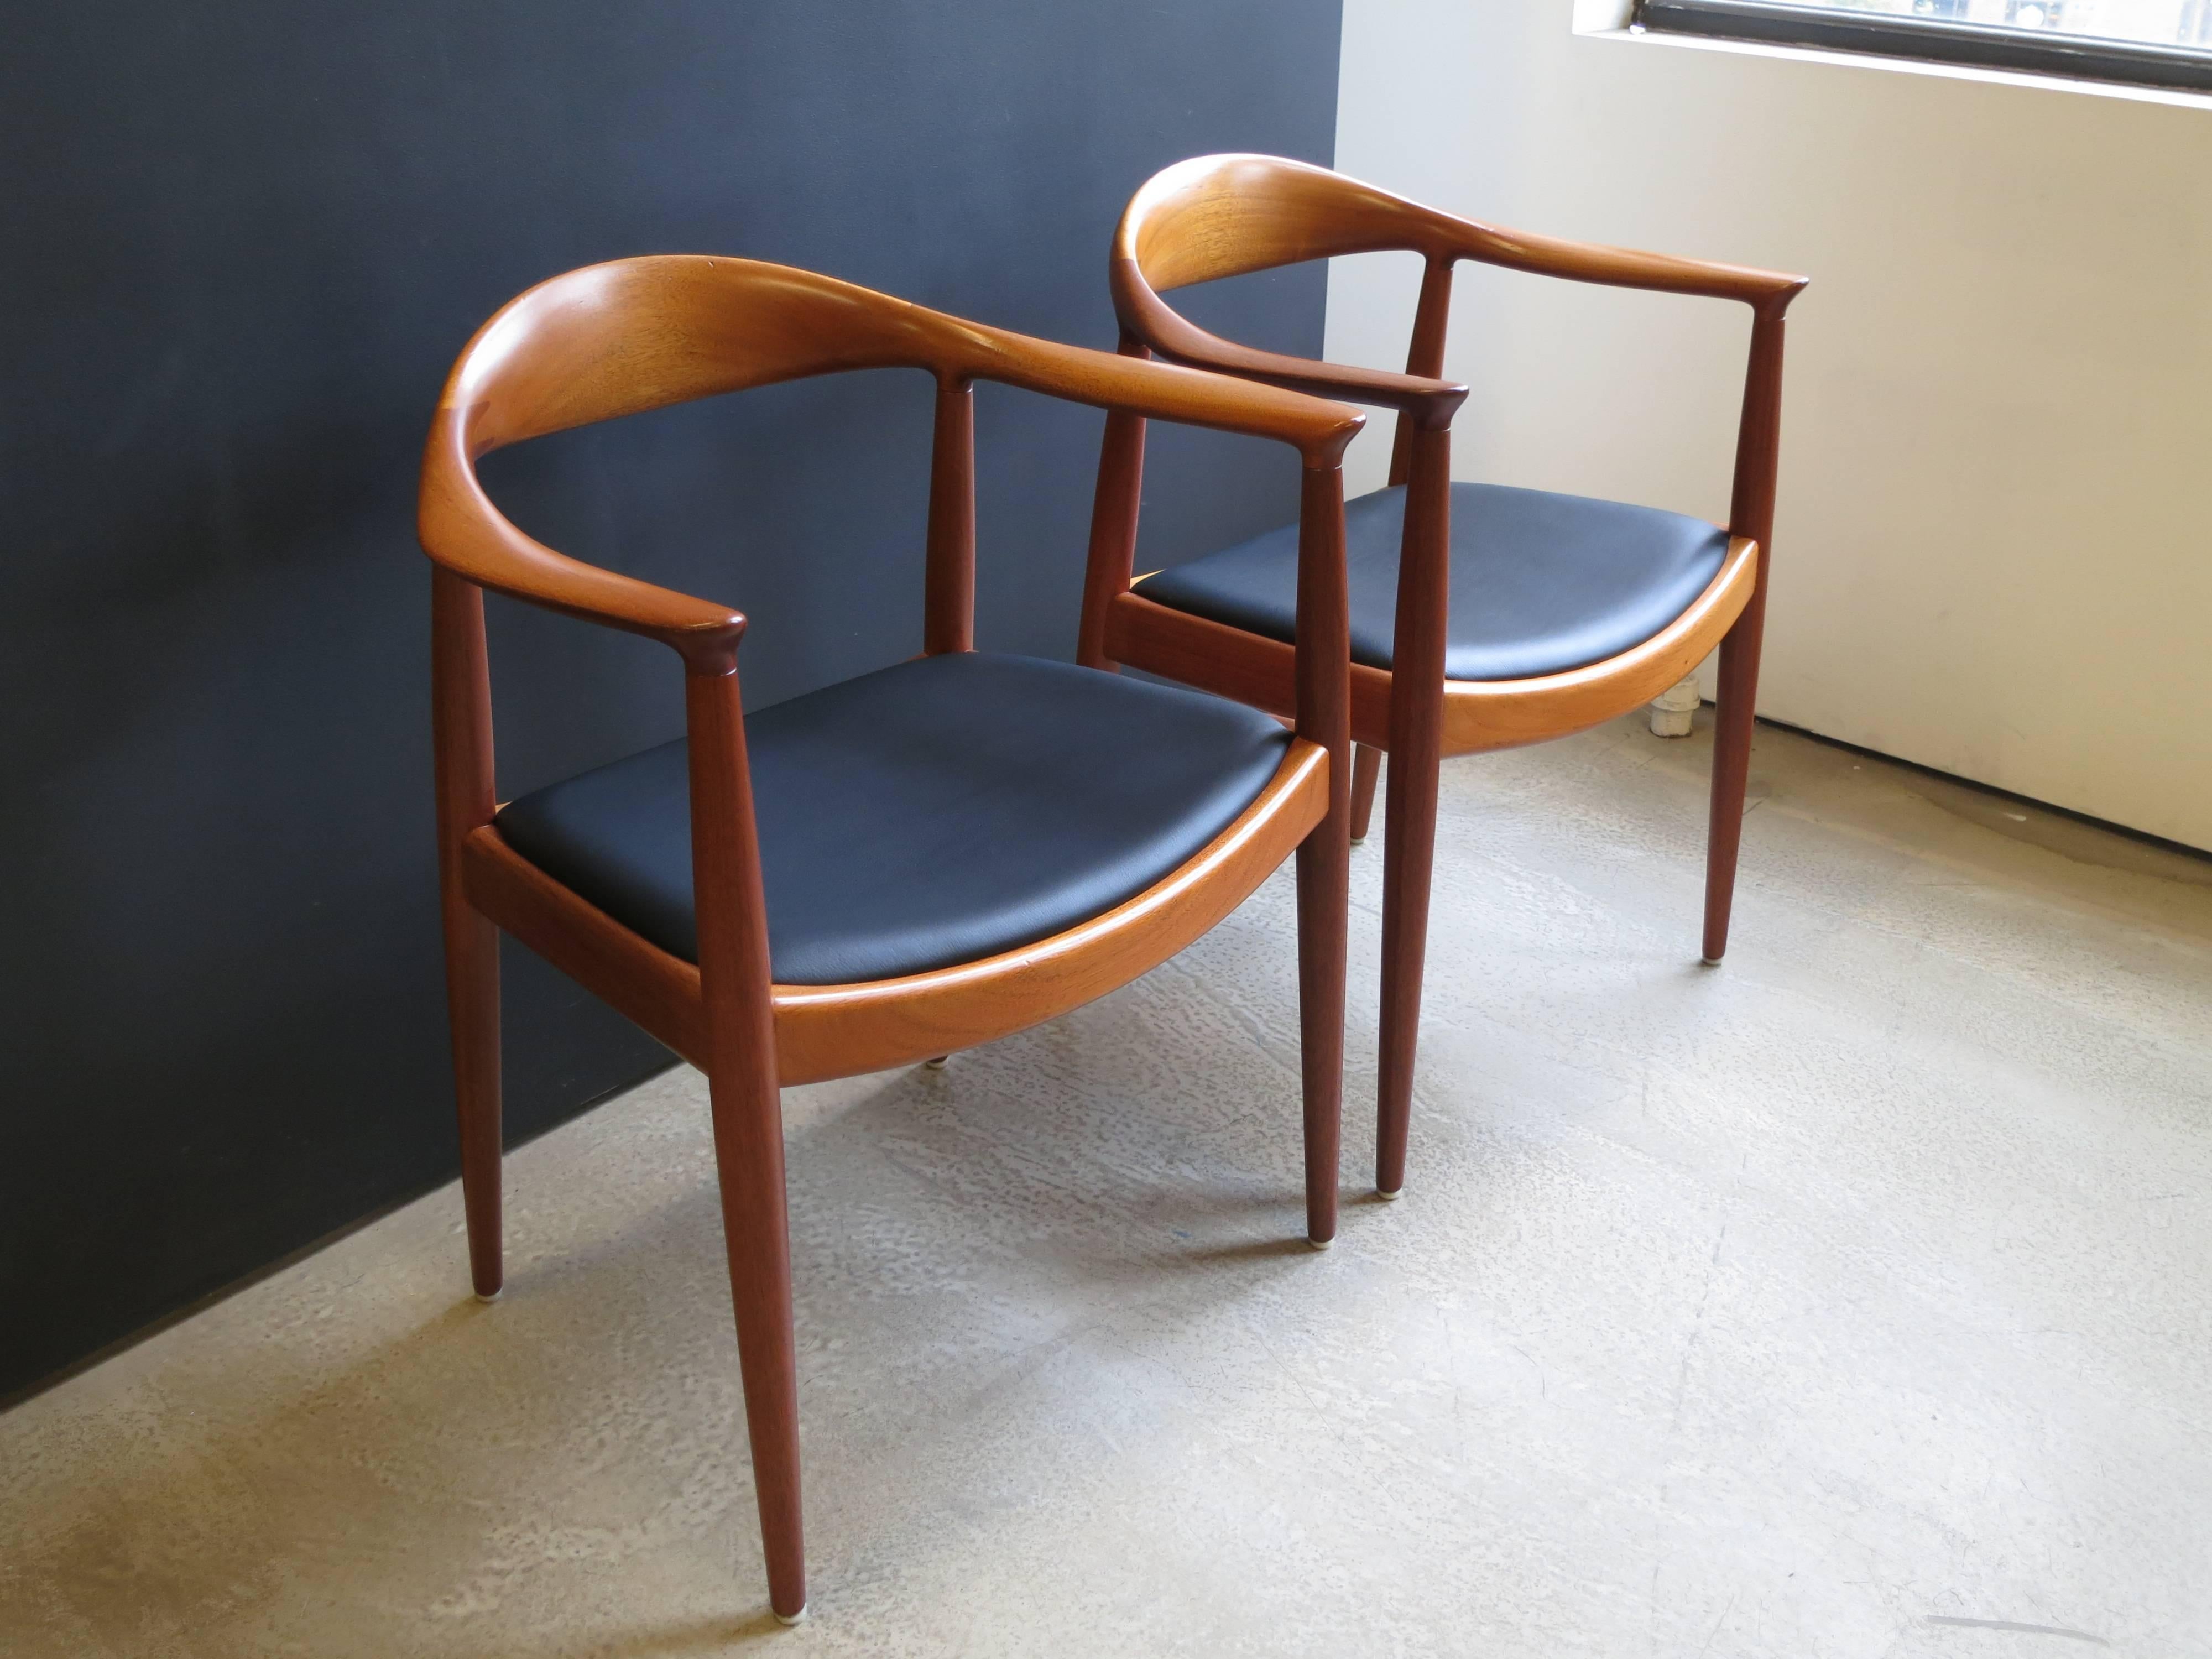 These eight round back chairs, Model JH-503 ("The Chair") are early models made by the original cabinetmaker, Johannes Hansen. Each chair is stamped with the cabinetmaker's mark on the underside of the seat frame. The frames are of